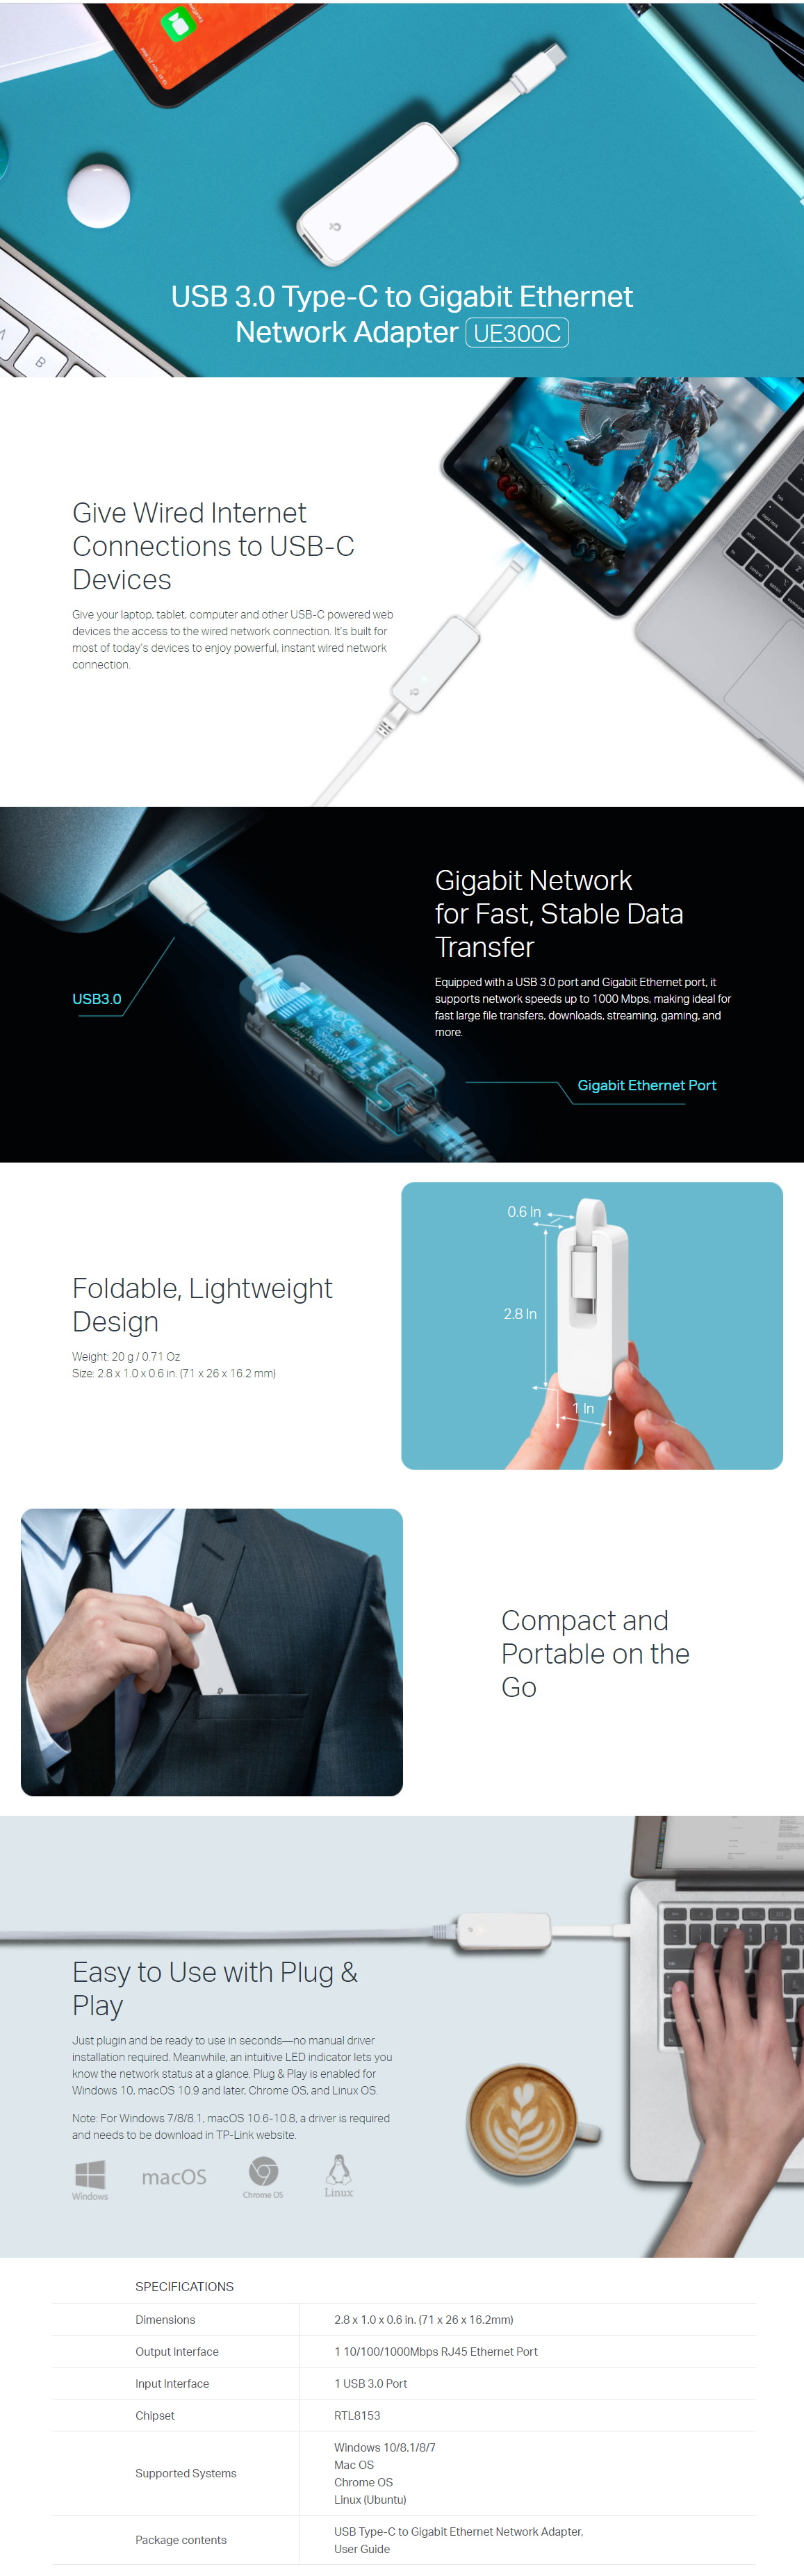 A large marketing image providing additional information about the product TP-Link UE300C - USB Type-C to Gigabit Ethernet Network Adapter - Additional alt info not provided